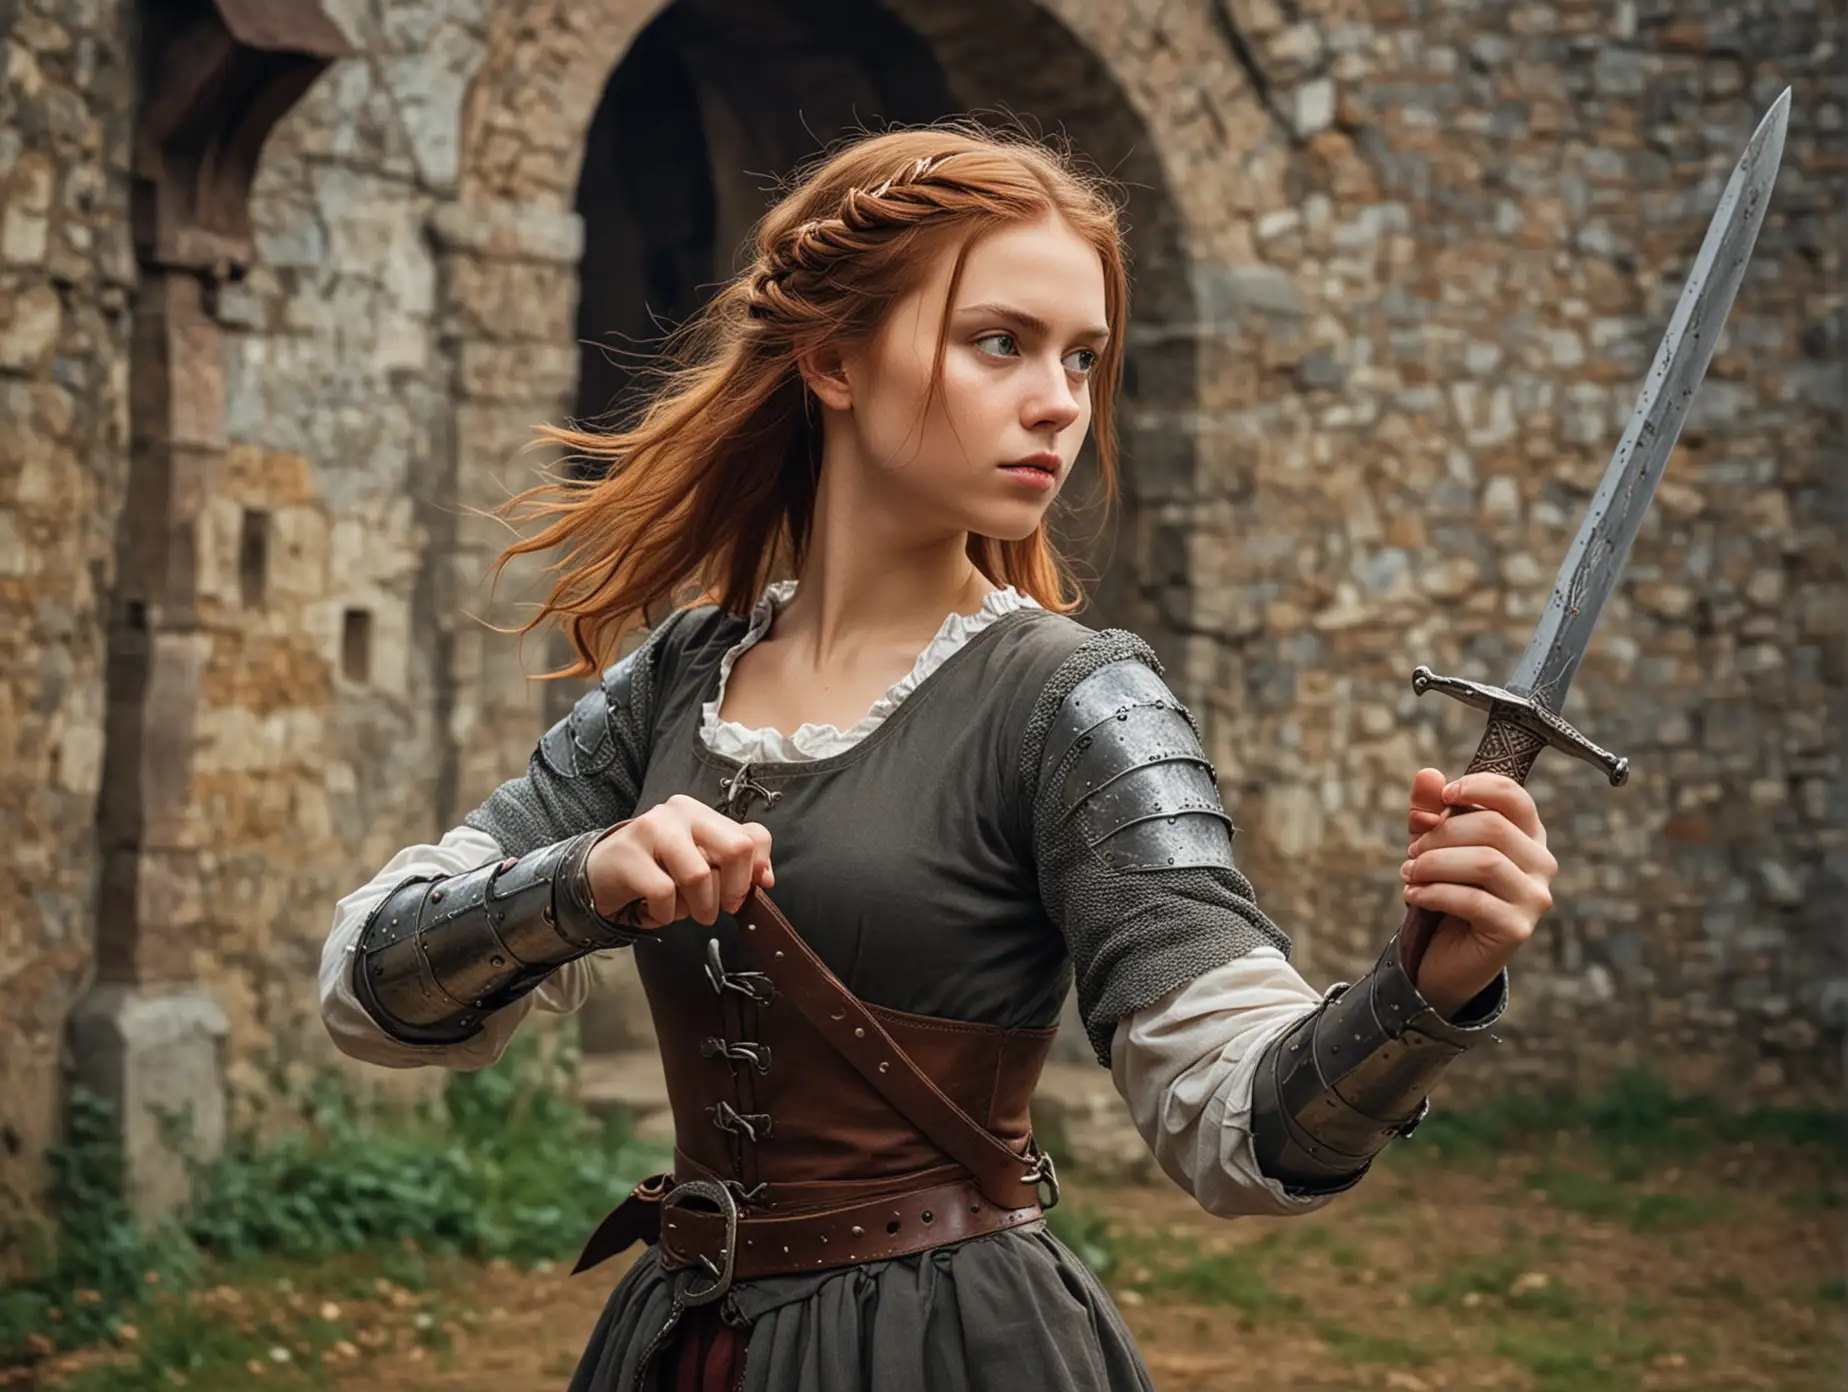 Medieval-Girl-Warrior-with-Chestnut-Hair-and-Dagger